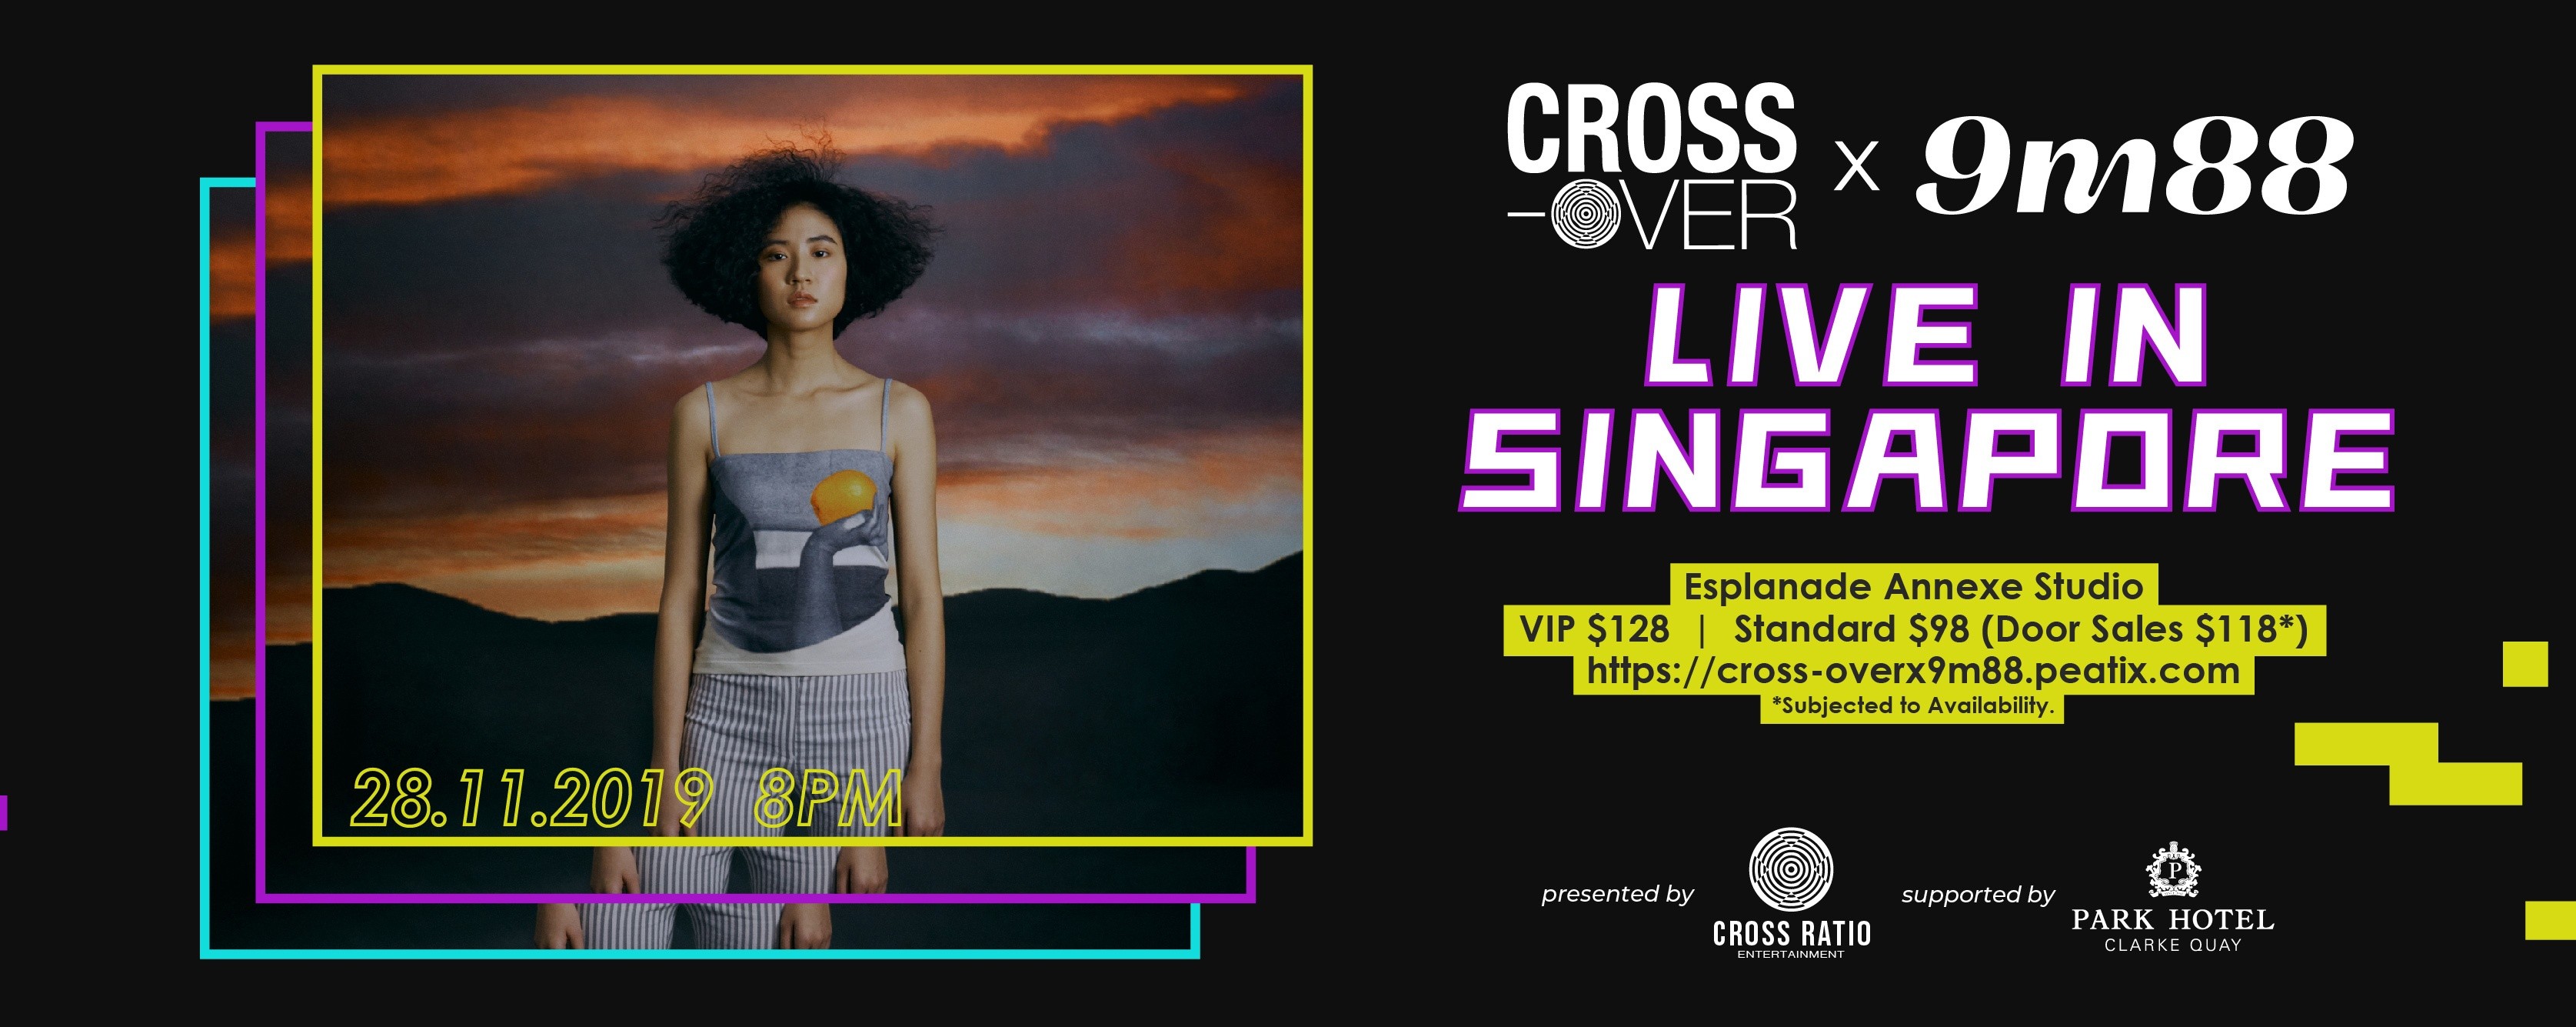 cross-over x 9m88: Live in Singapore